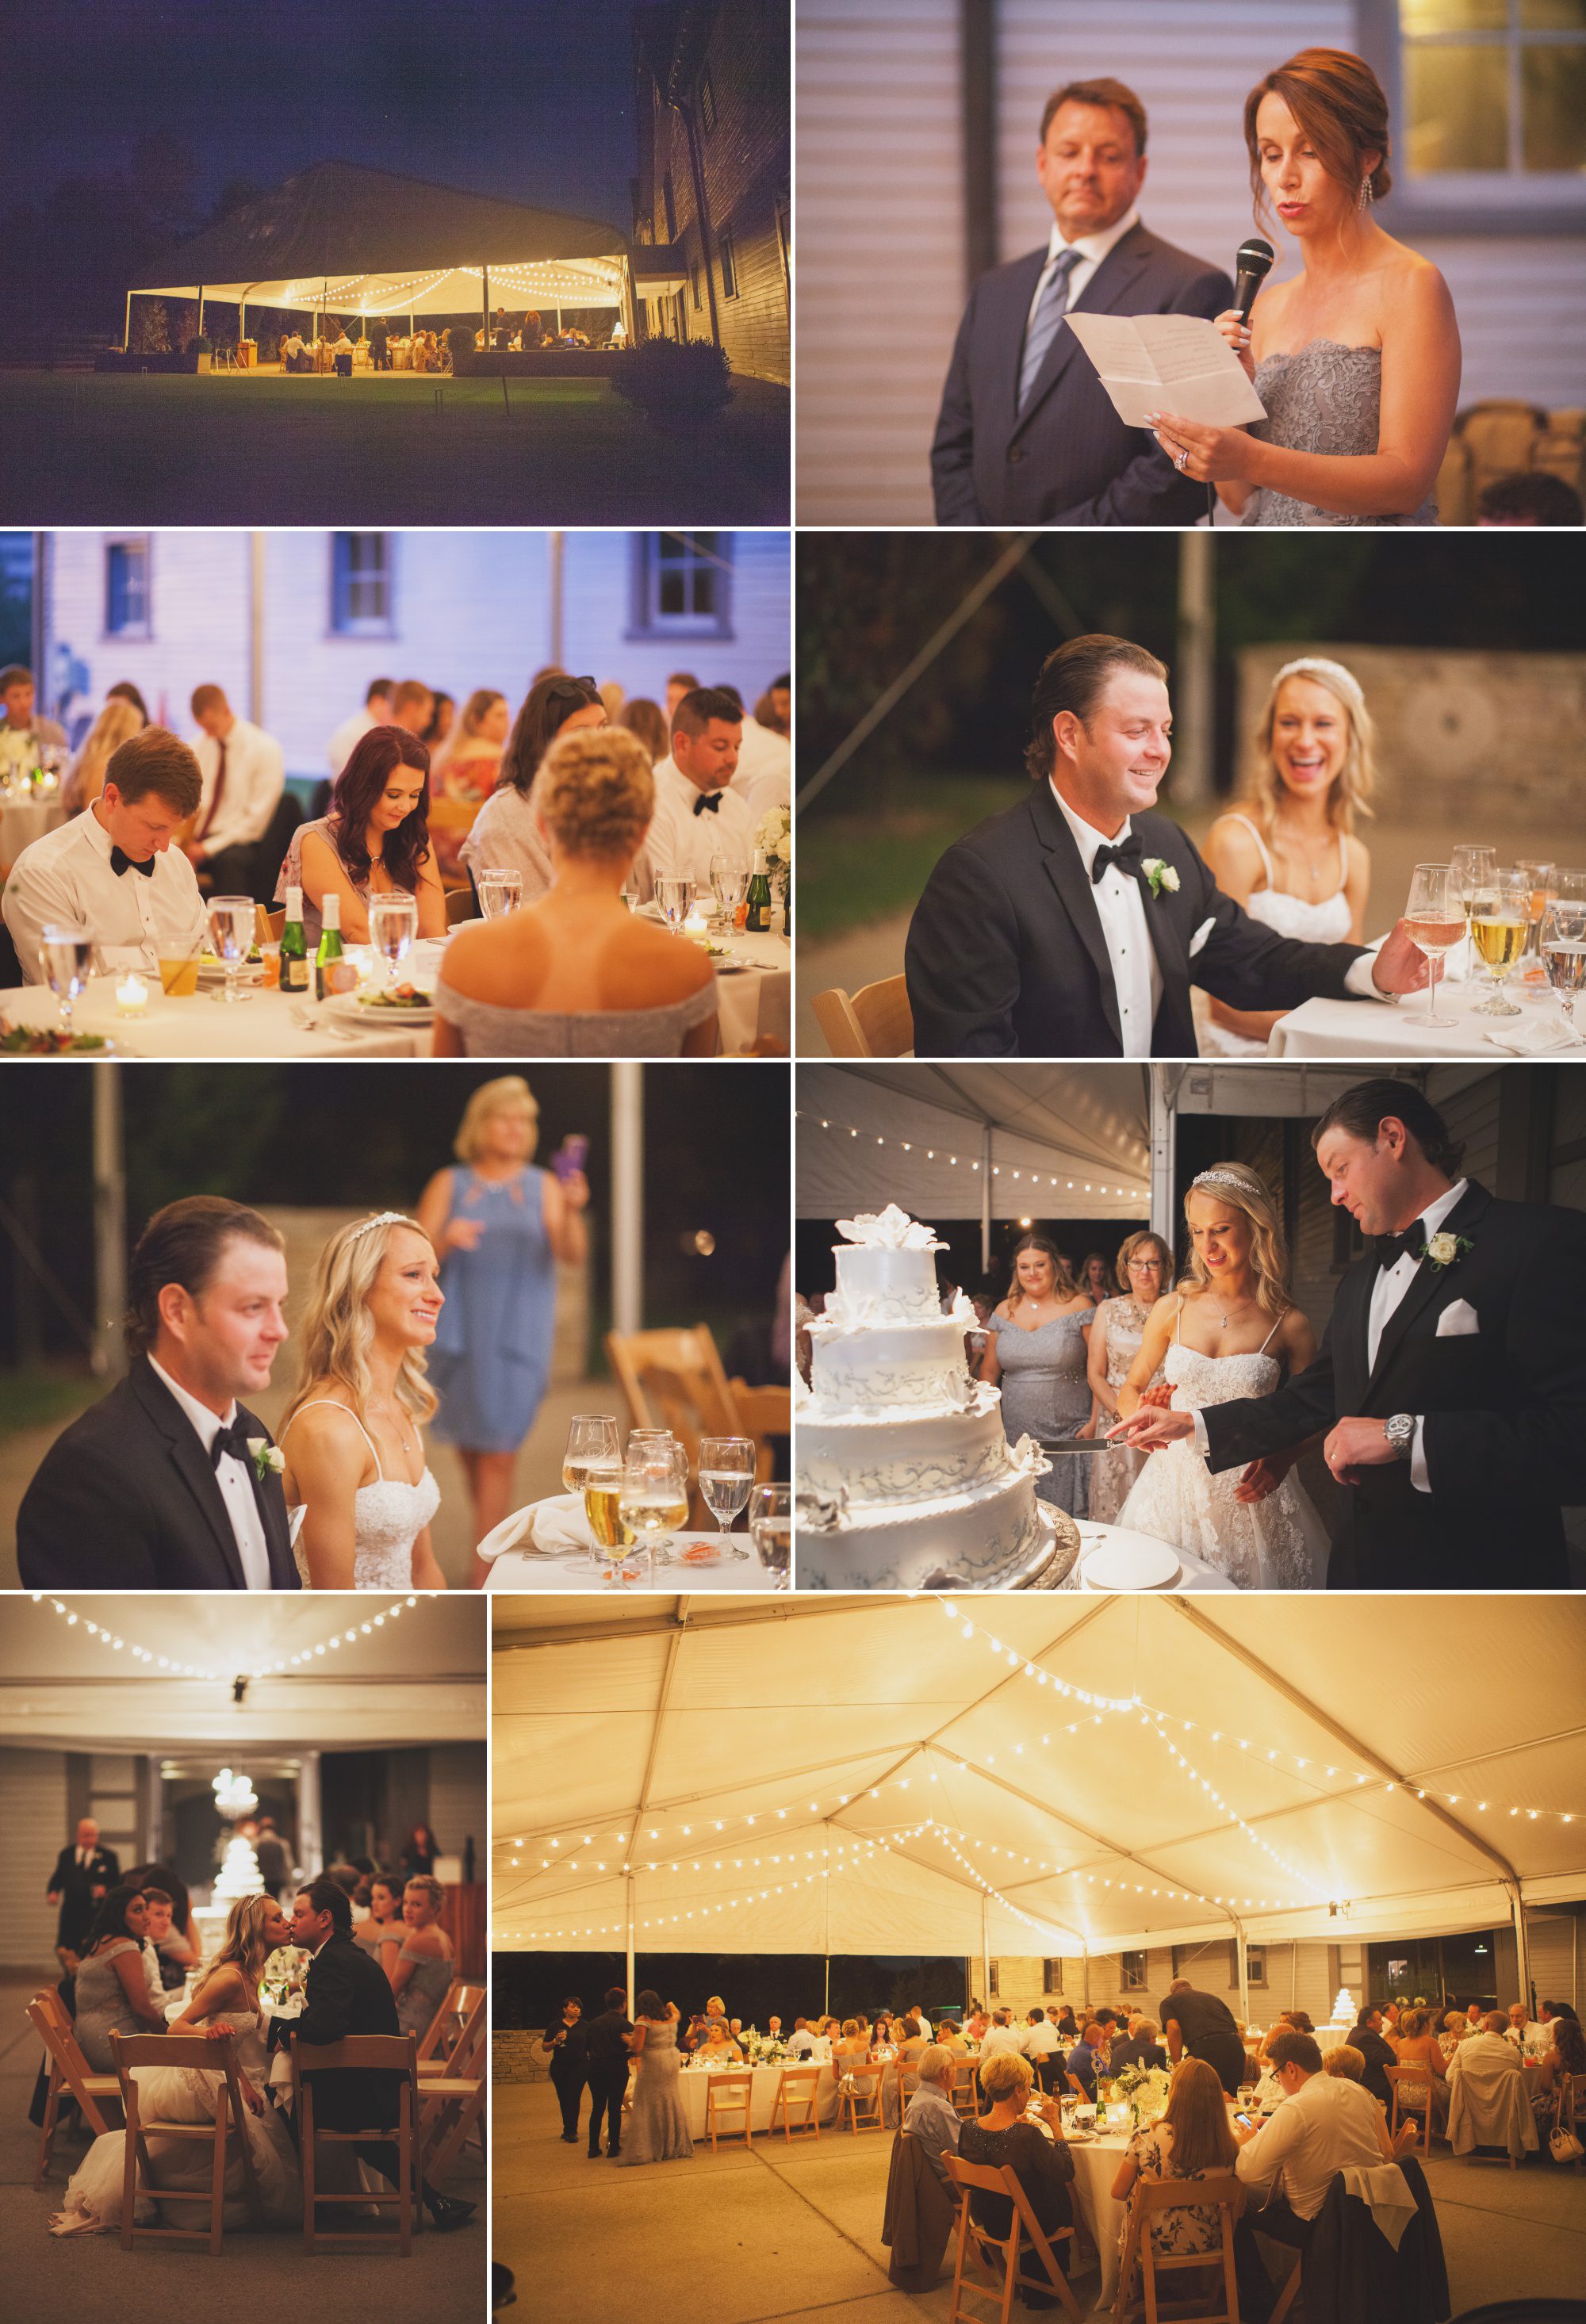 Toasts, dinner and cake cutting at wedding reception Belle Meade Plantation in Nashville, TN. Photos by Krista Lee Photography 